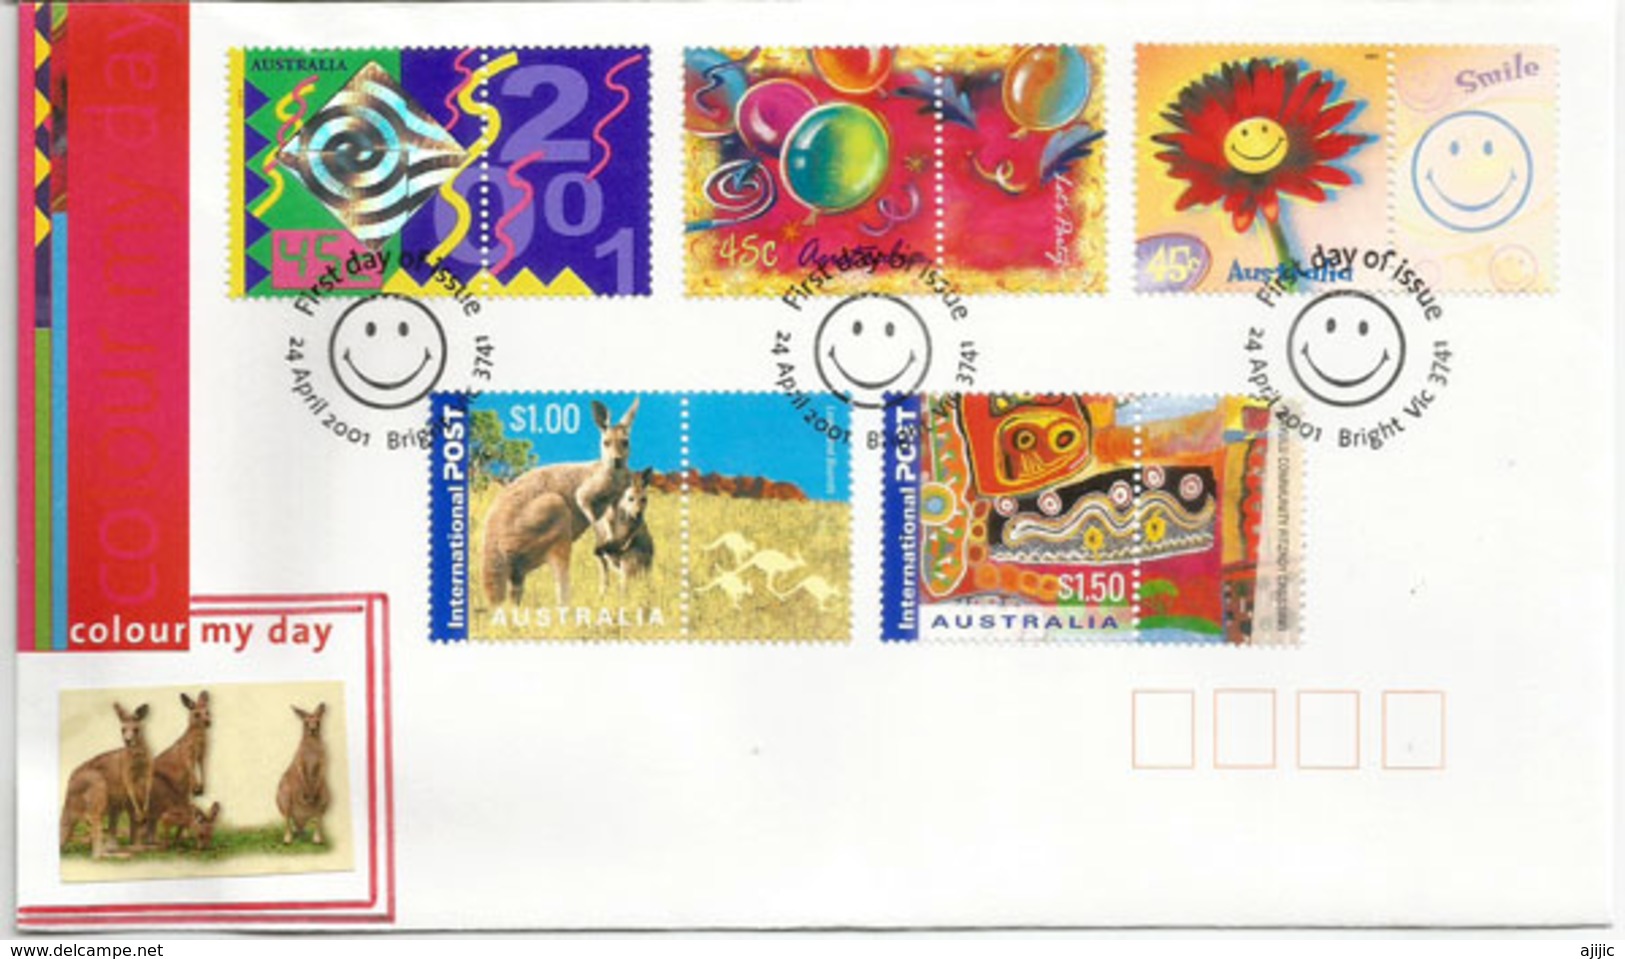 AUSTRALIA: Hologramme Stamp & Colour My Day Stamps. FDC Bright.Victoria. 2001 (hautes Faciales) - Hologramme